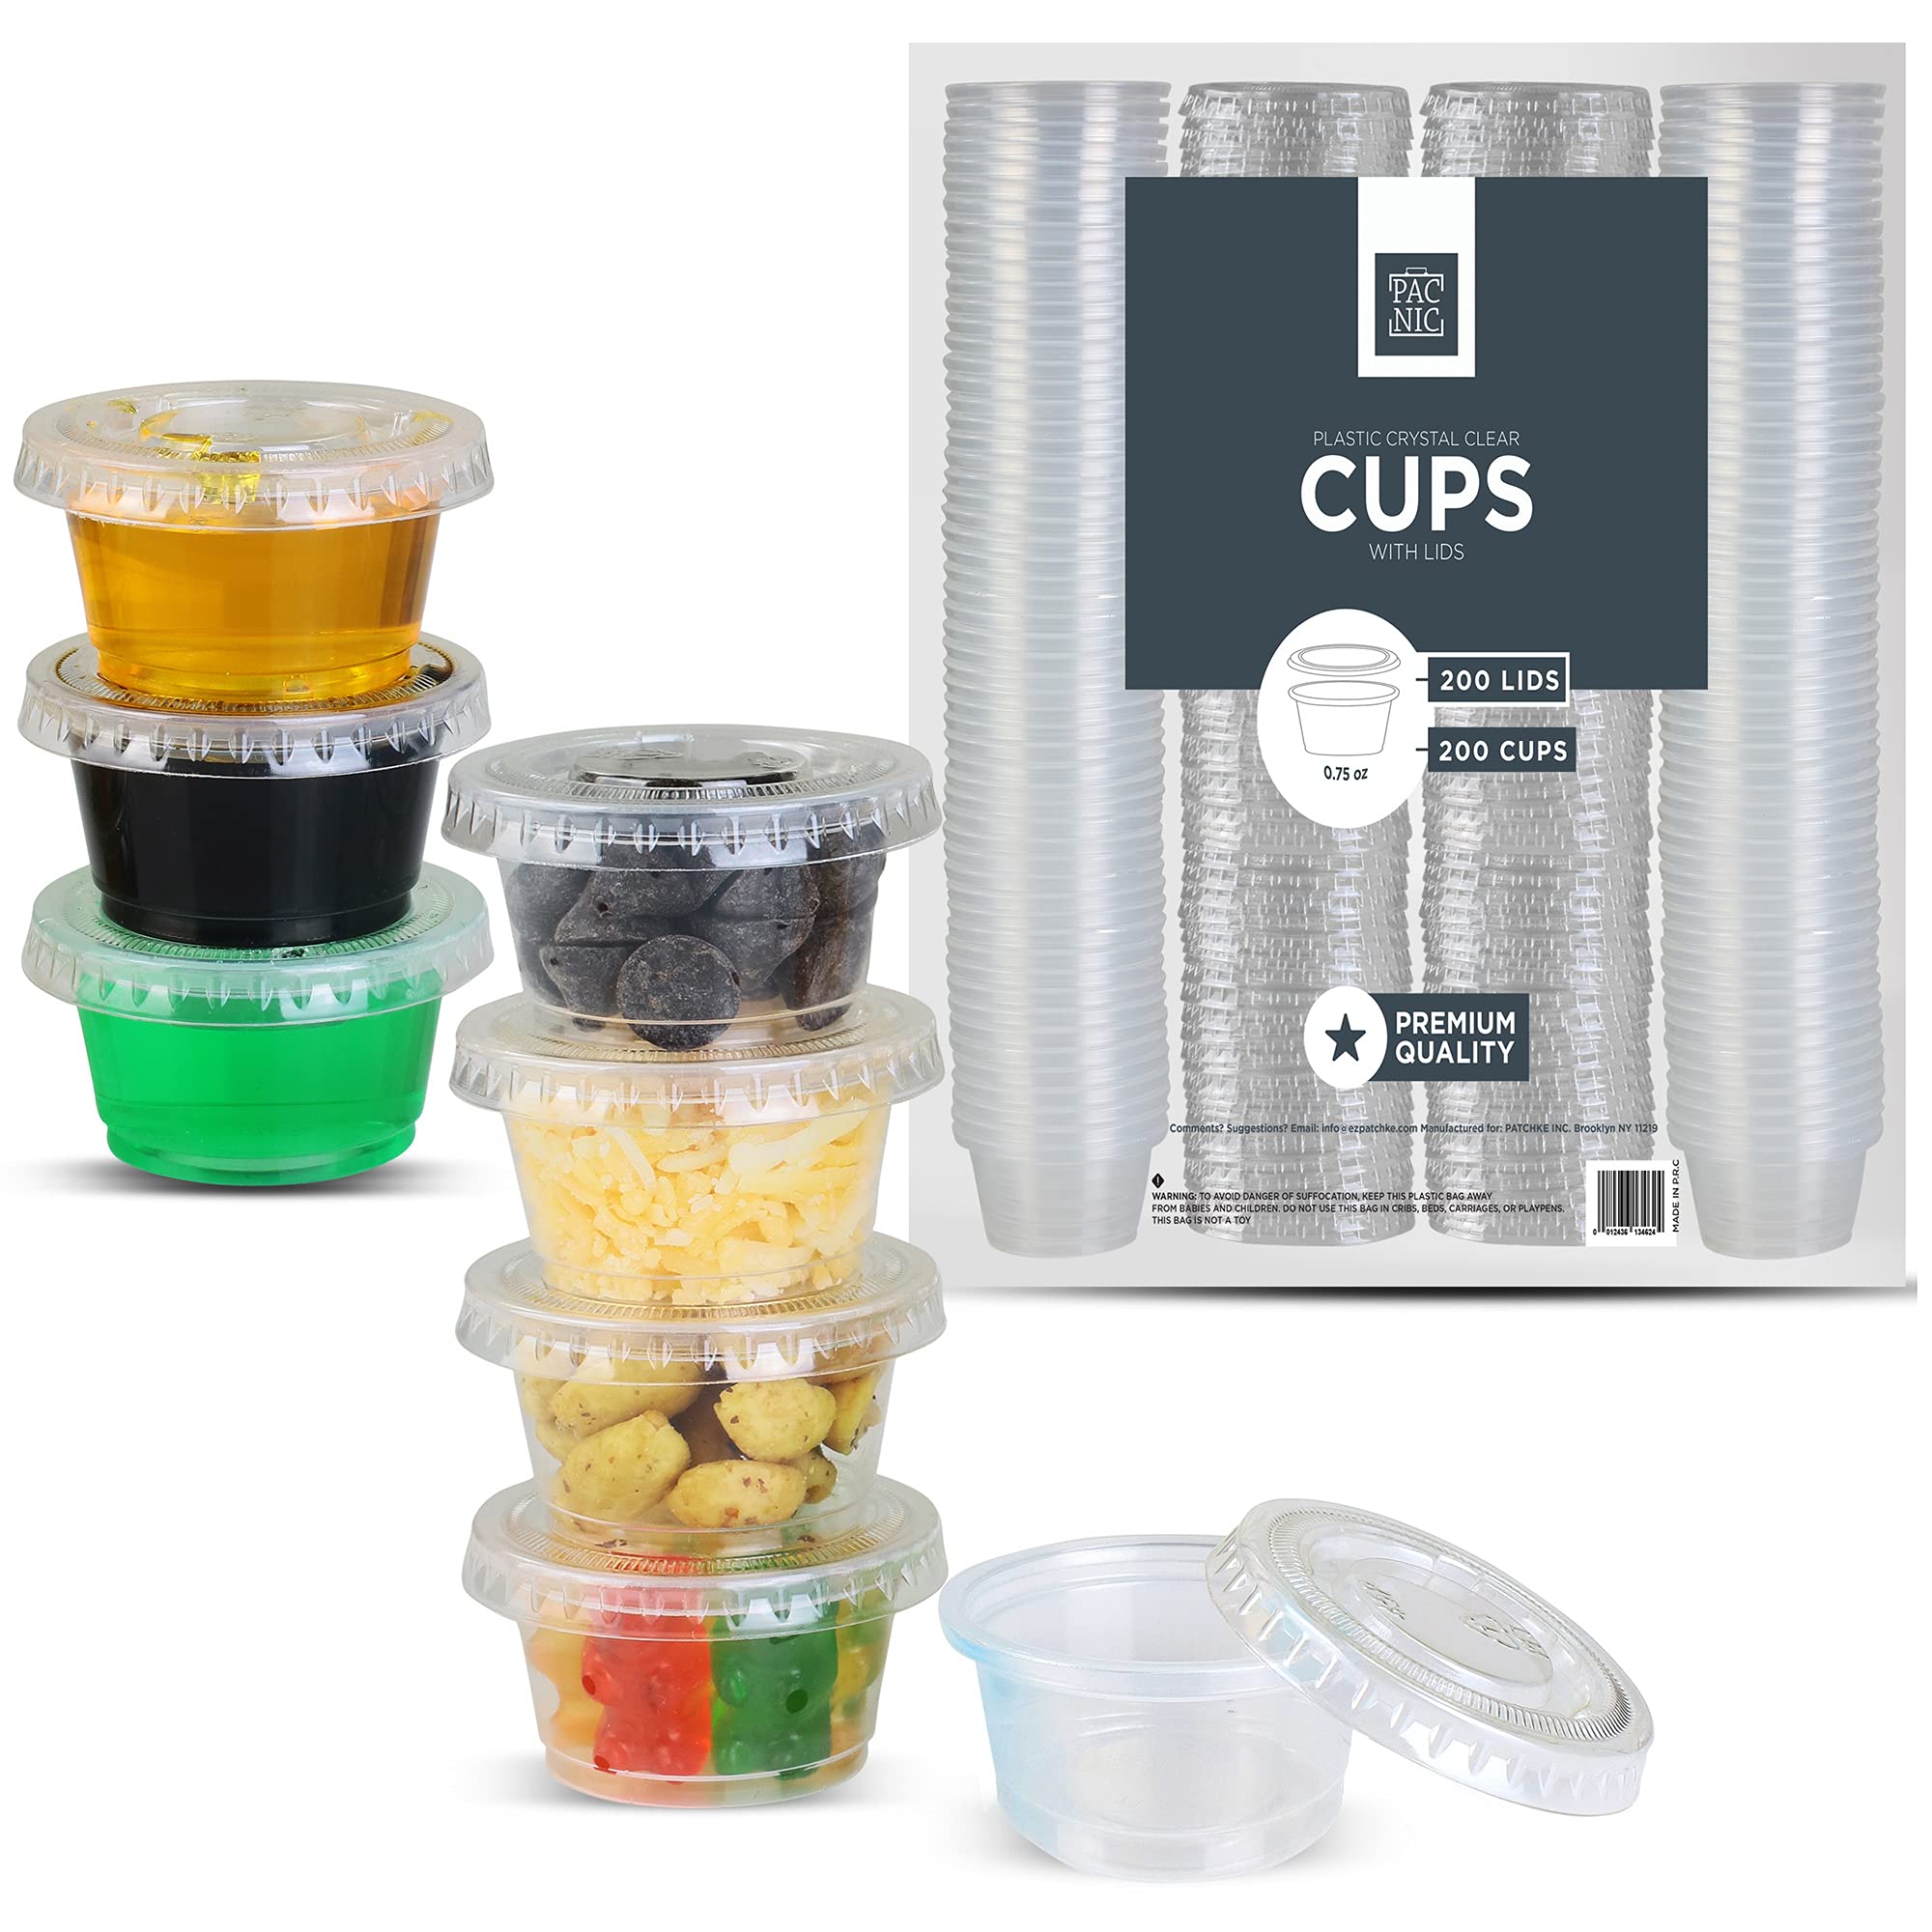 0.75 Oz) Medicine Cups with Lids - Condiment Containers, Small Sample Cups,  Leak-Resistant, Tight fit, Easy Snap-on Lids - Clear and Fully Transparent.  (Bulk Pack 200 Cups + 200 Lids) 3/4 OZ - 200 Sets